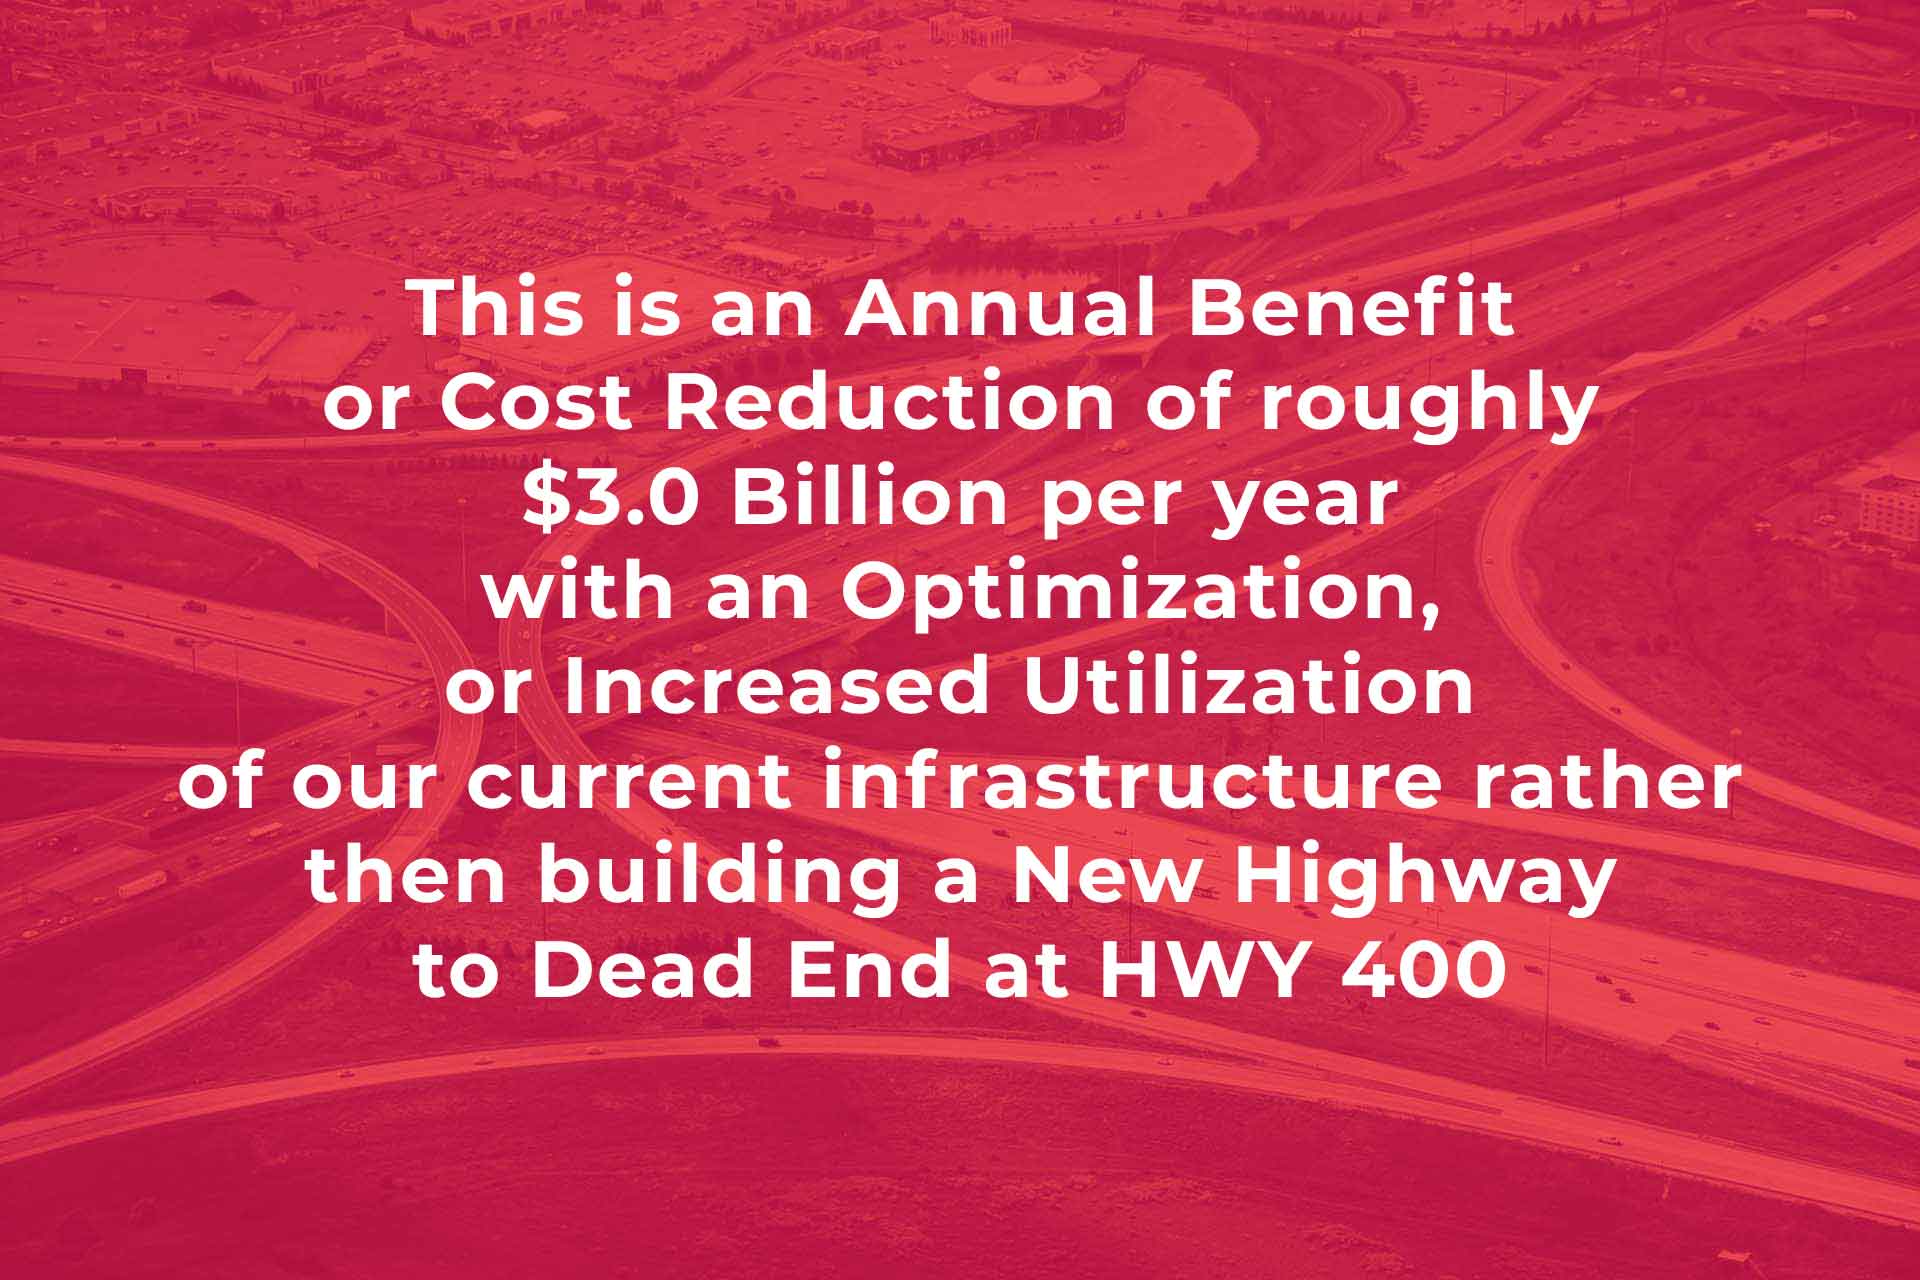 This is an Annual Benefit or Cost Reduction of roughly $3.0 Billion per year with an Optimization, or Increased Utilization of our current infrastructure rather then building a New Highway to Dead End at HWY 400